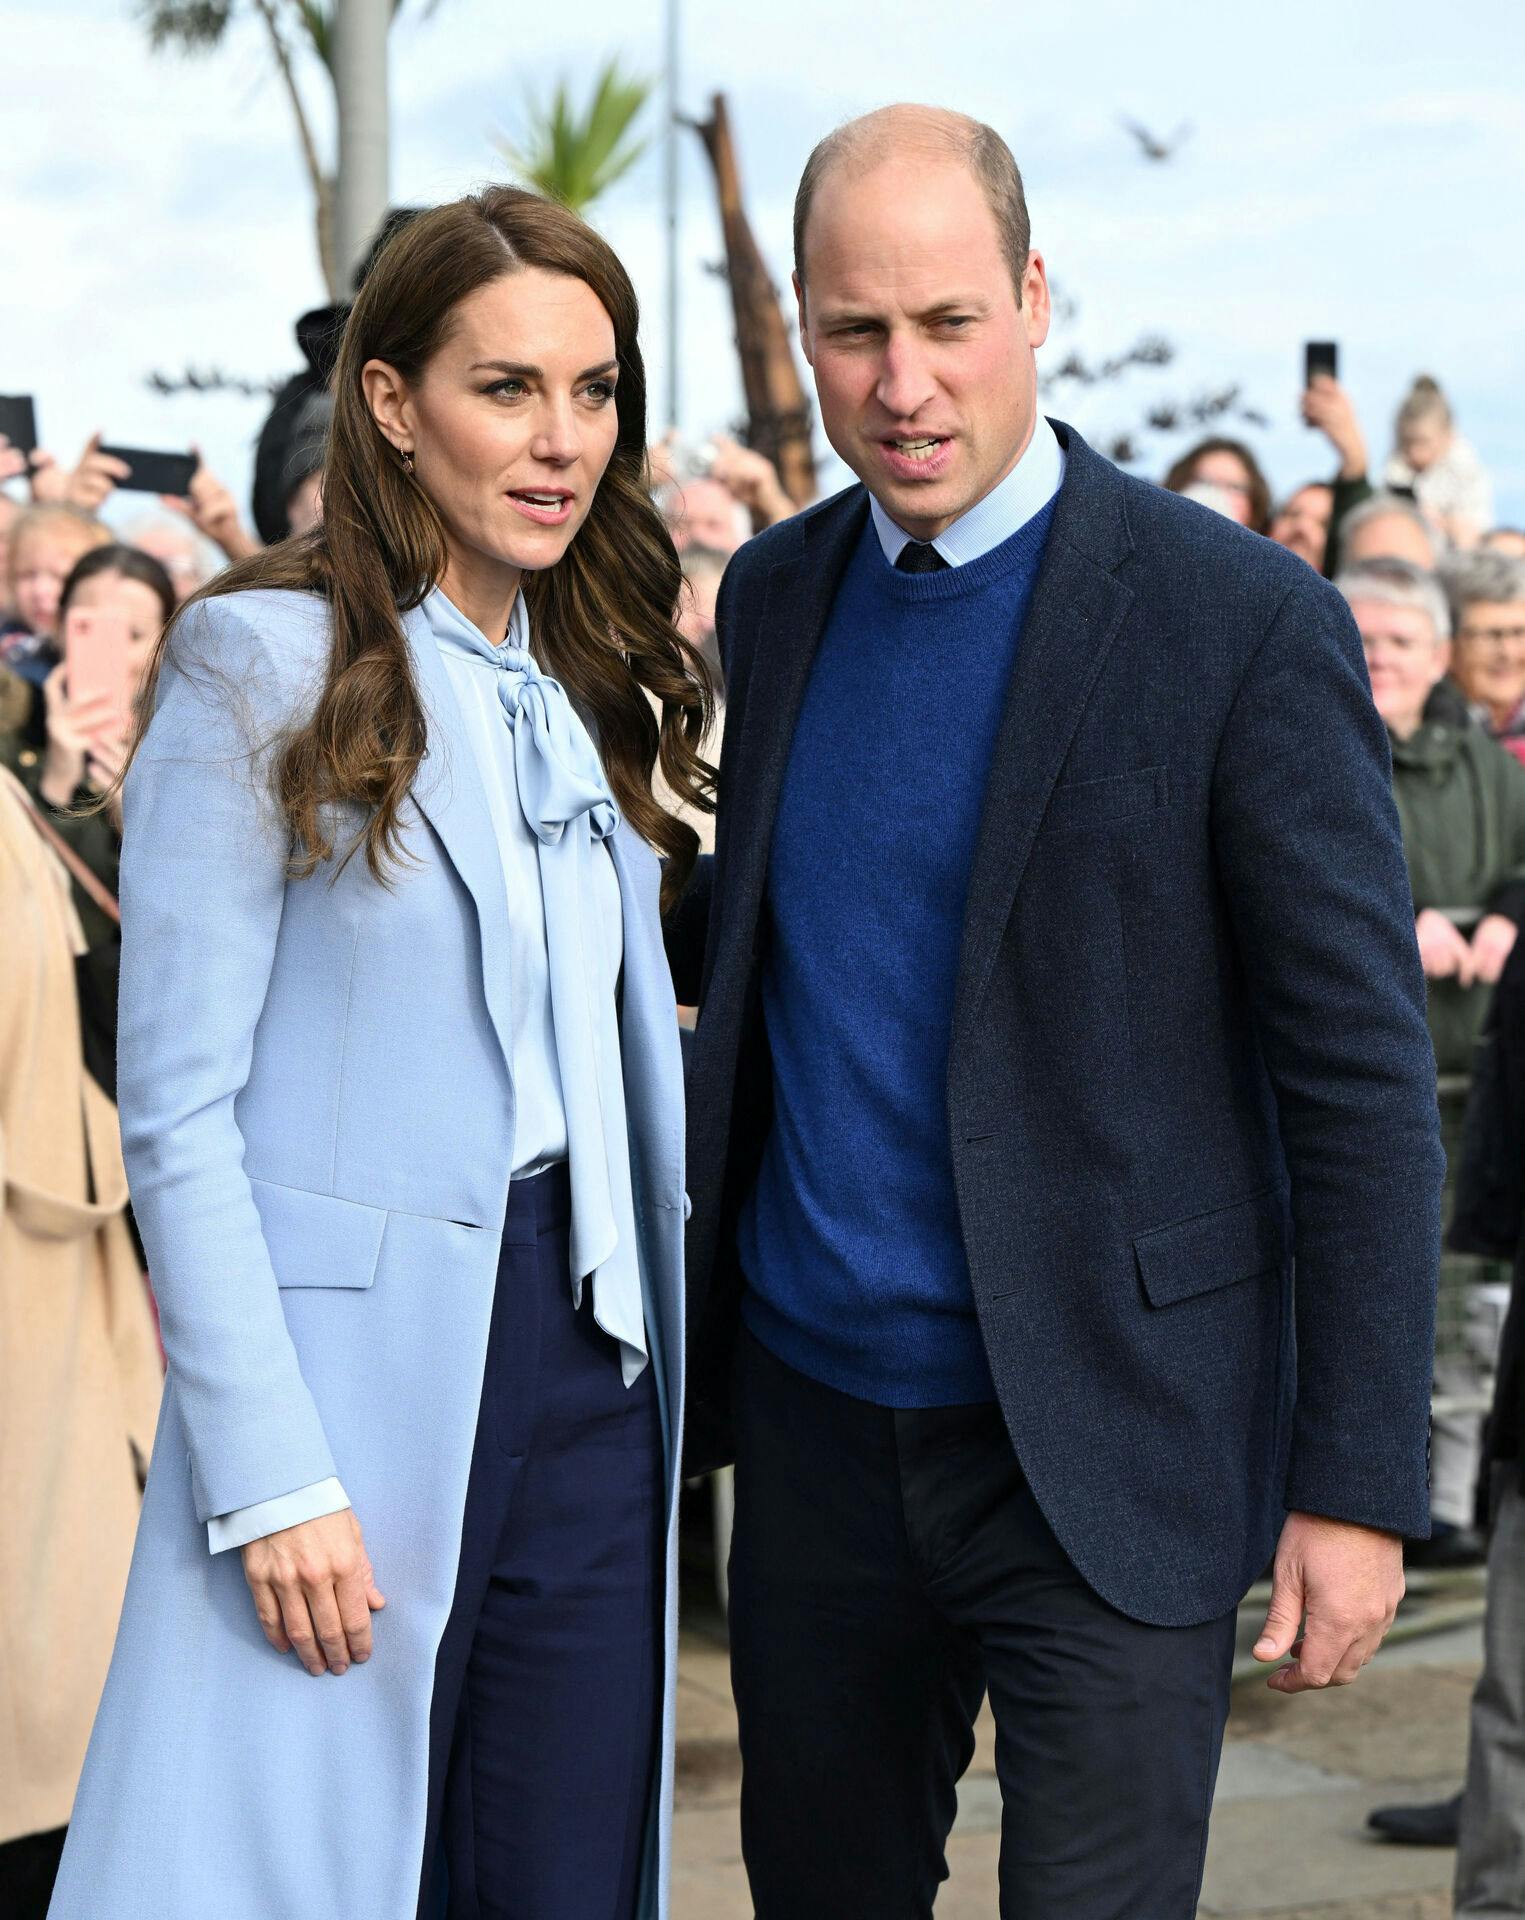 Britain's William, Prince of Wales and Catherine, Princess of Wales visit Northern Ireland, October 6, 2022. Tim Rooke/Pool via REUTERS